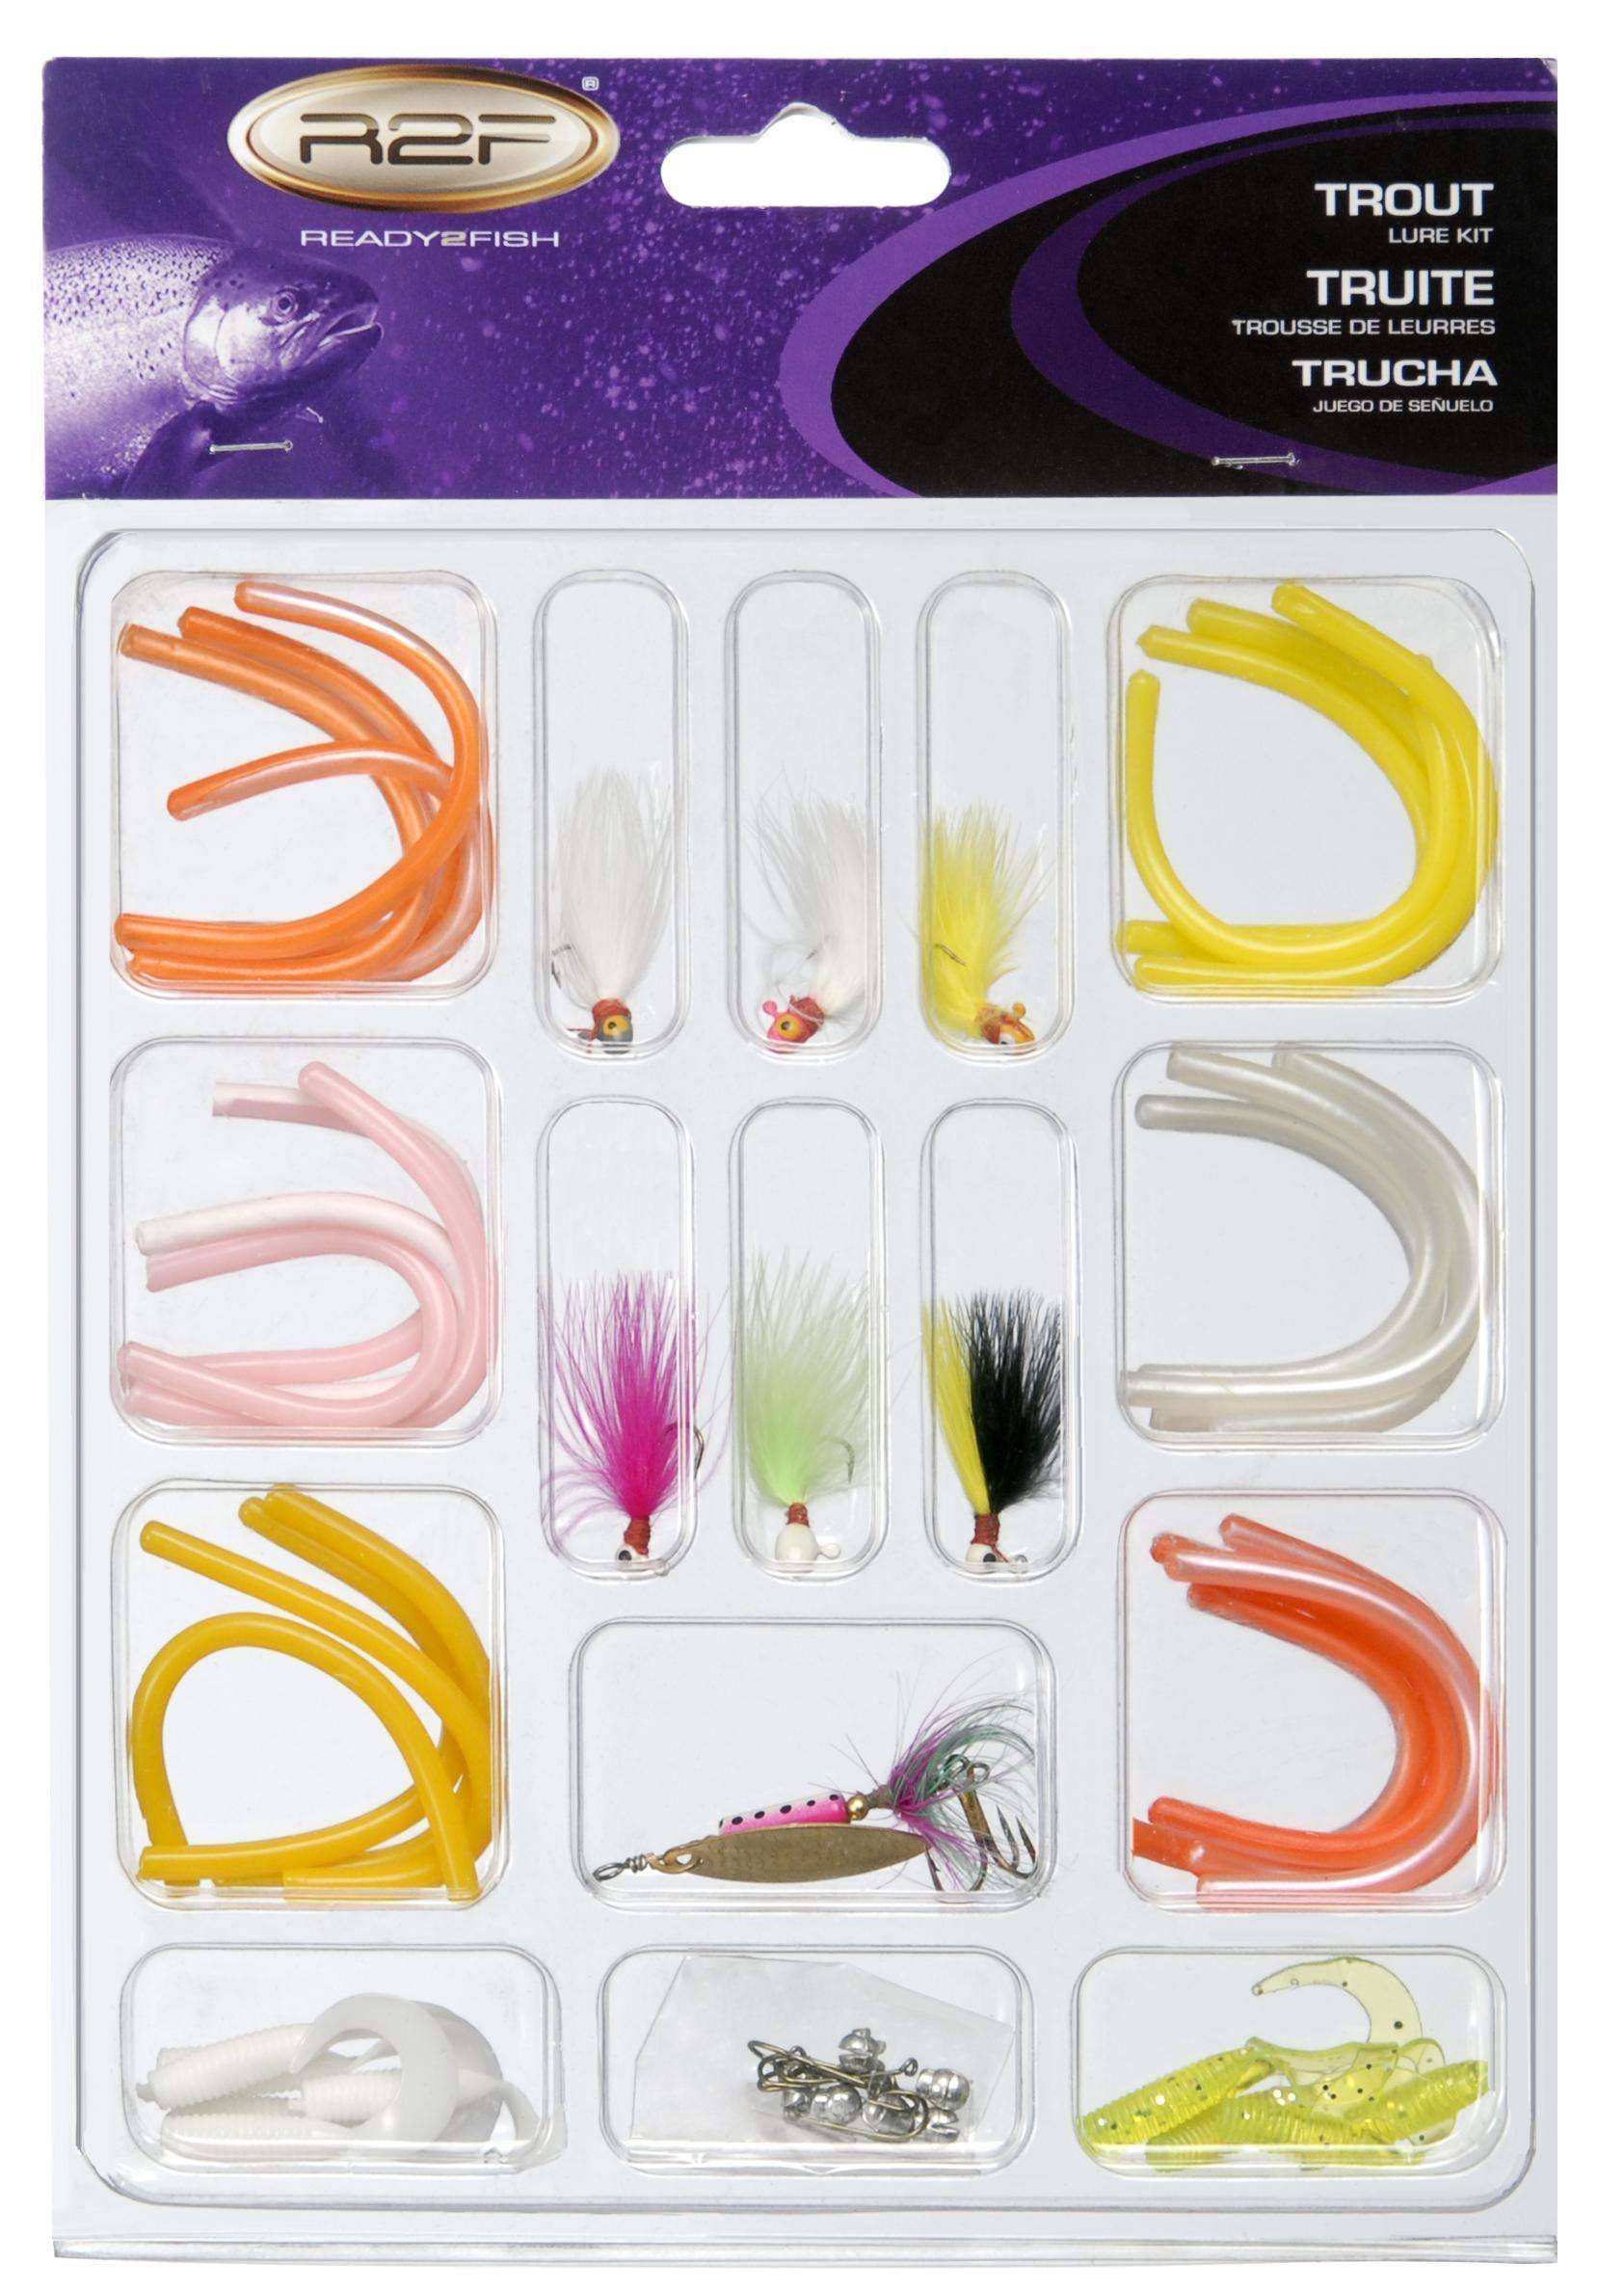 Ready 2 Fish Trout Lure Kit - The Best Lures For The Most Popular Species